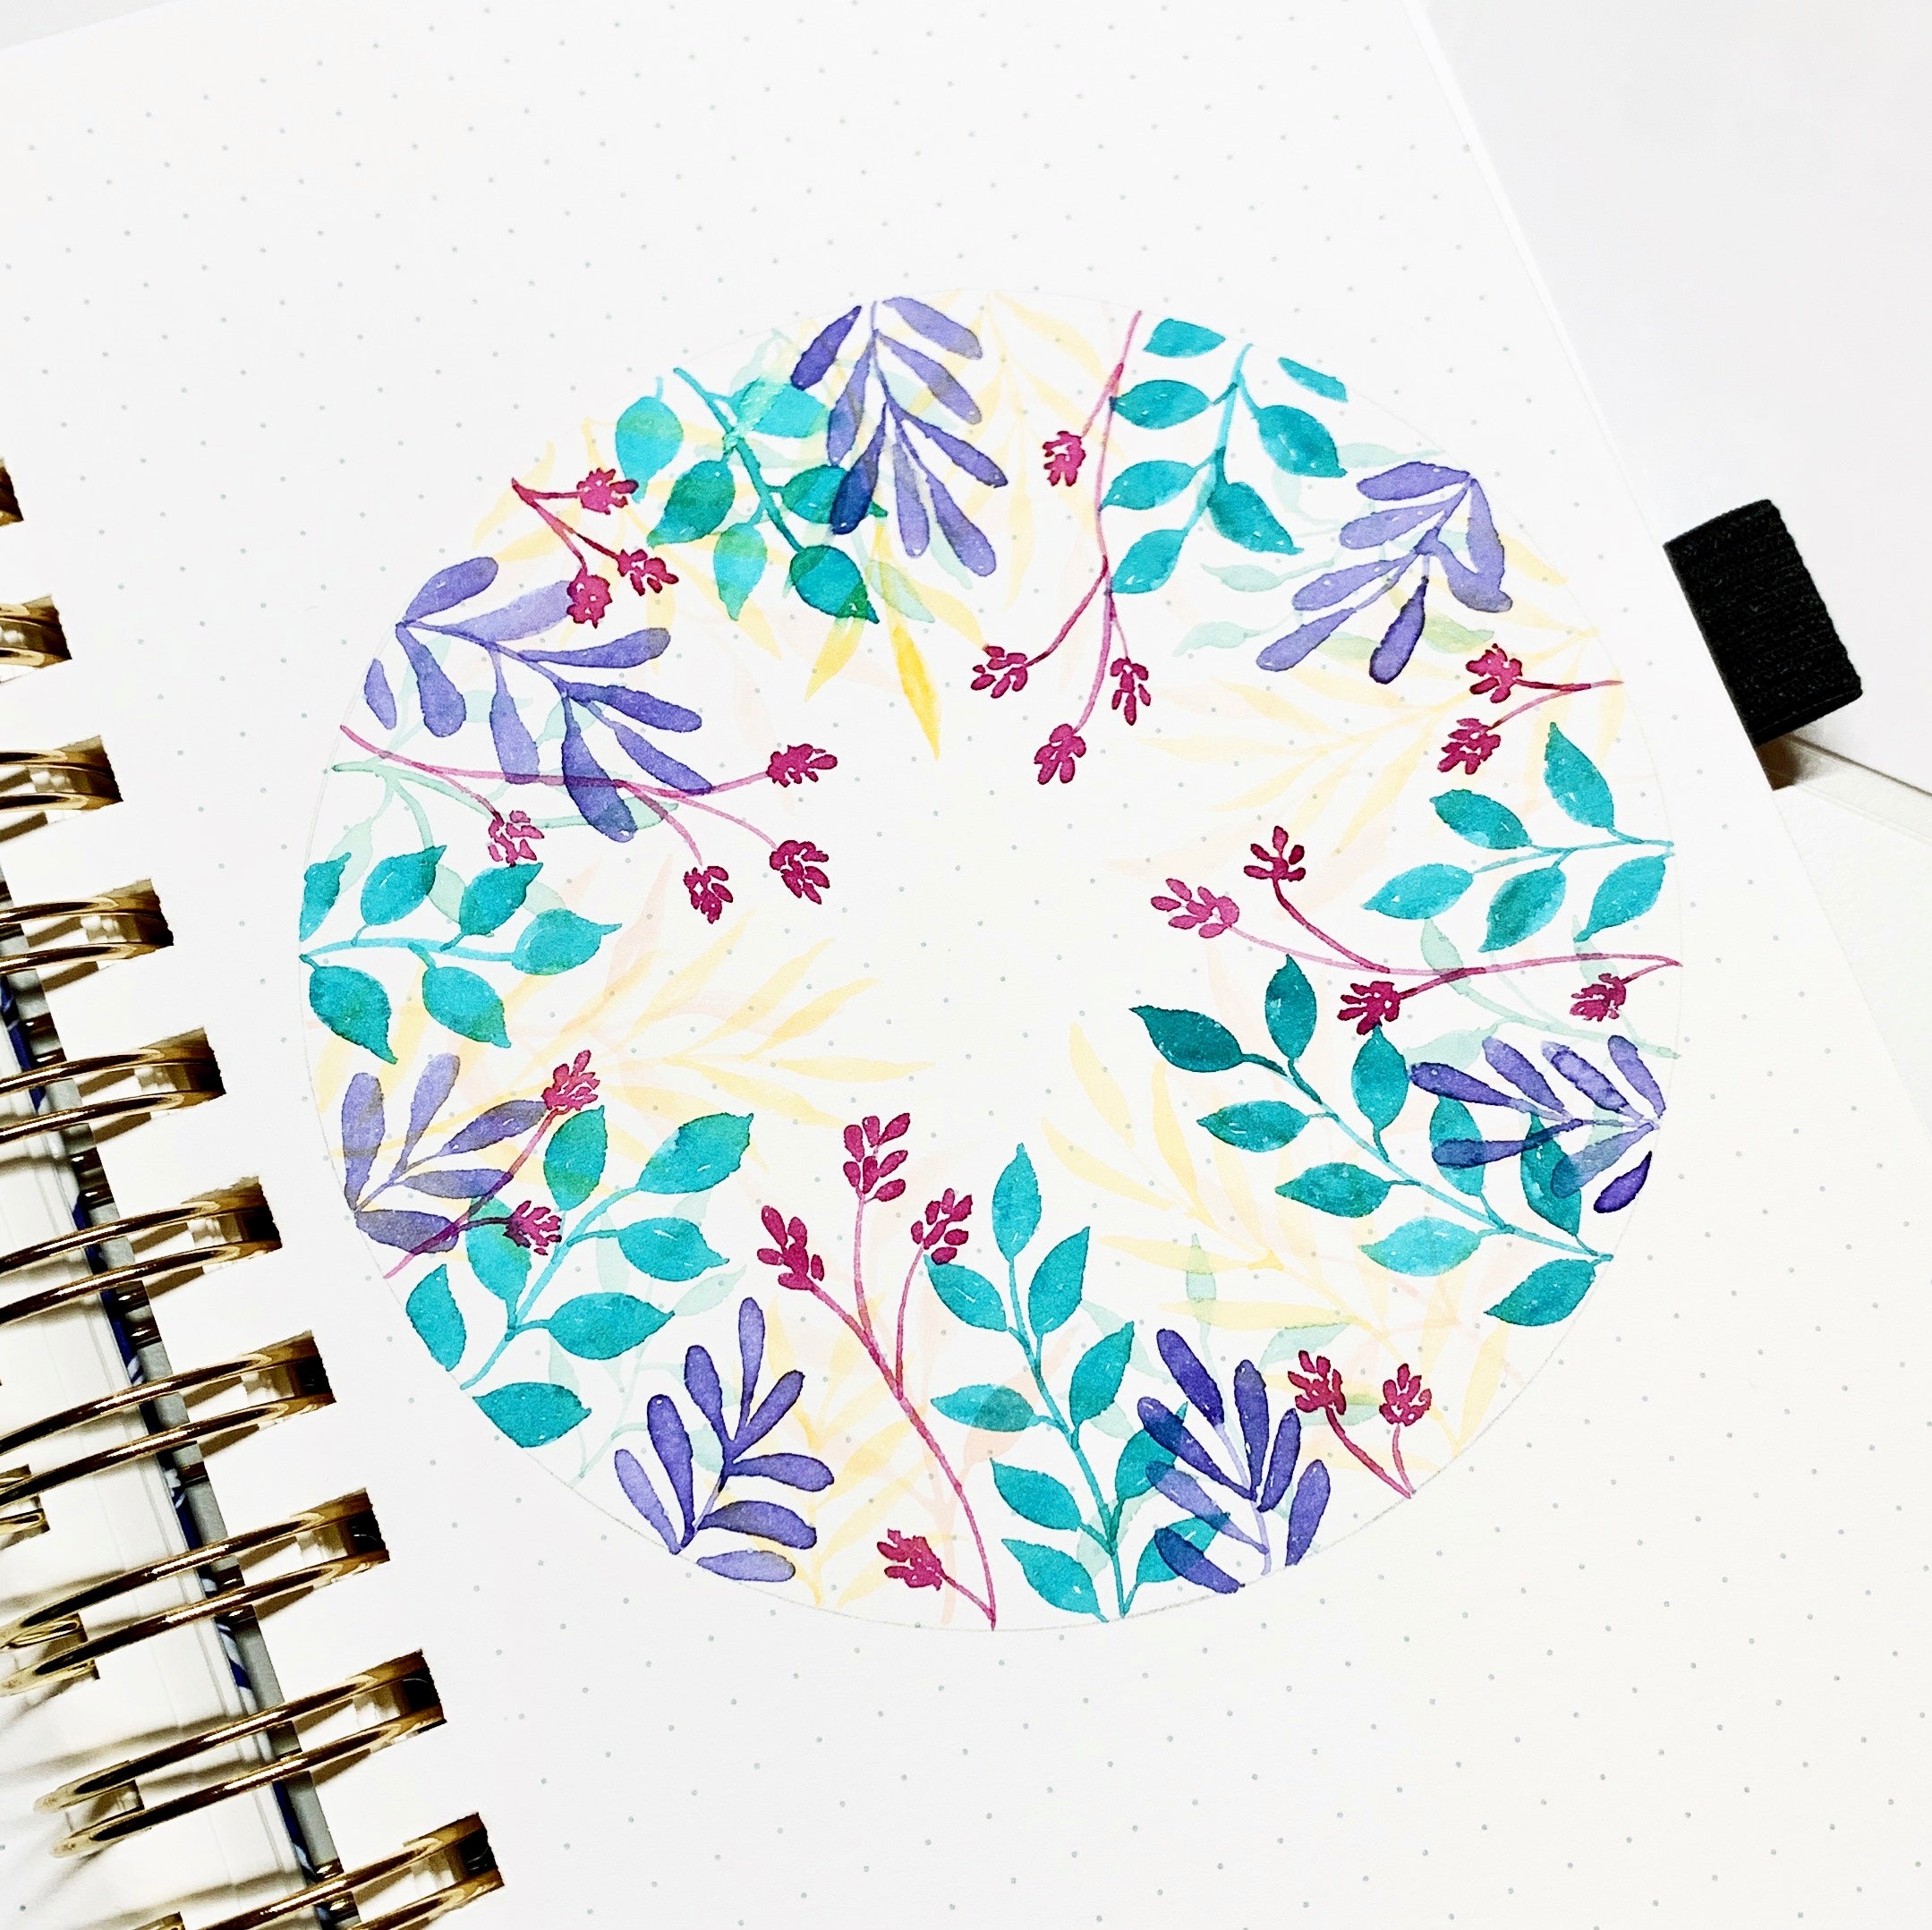 Learn how to create a fall foliage circle watercolor illustration with Adrienne from @studio80design!